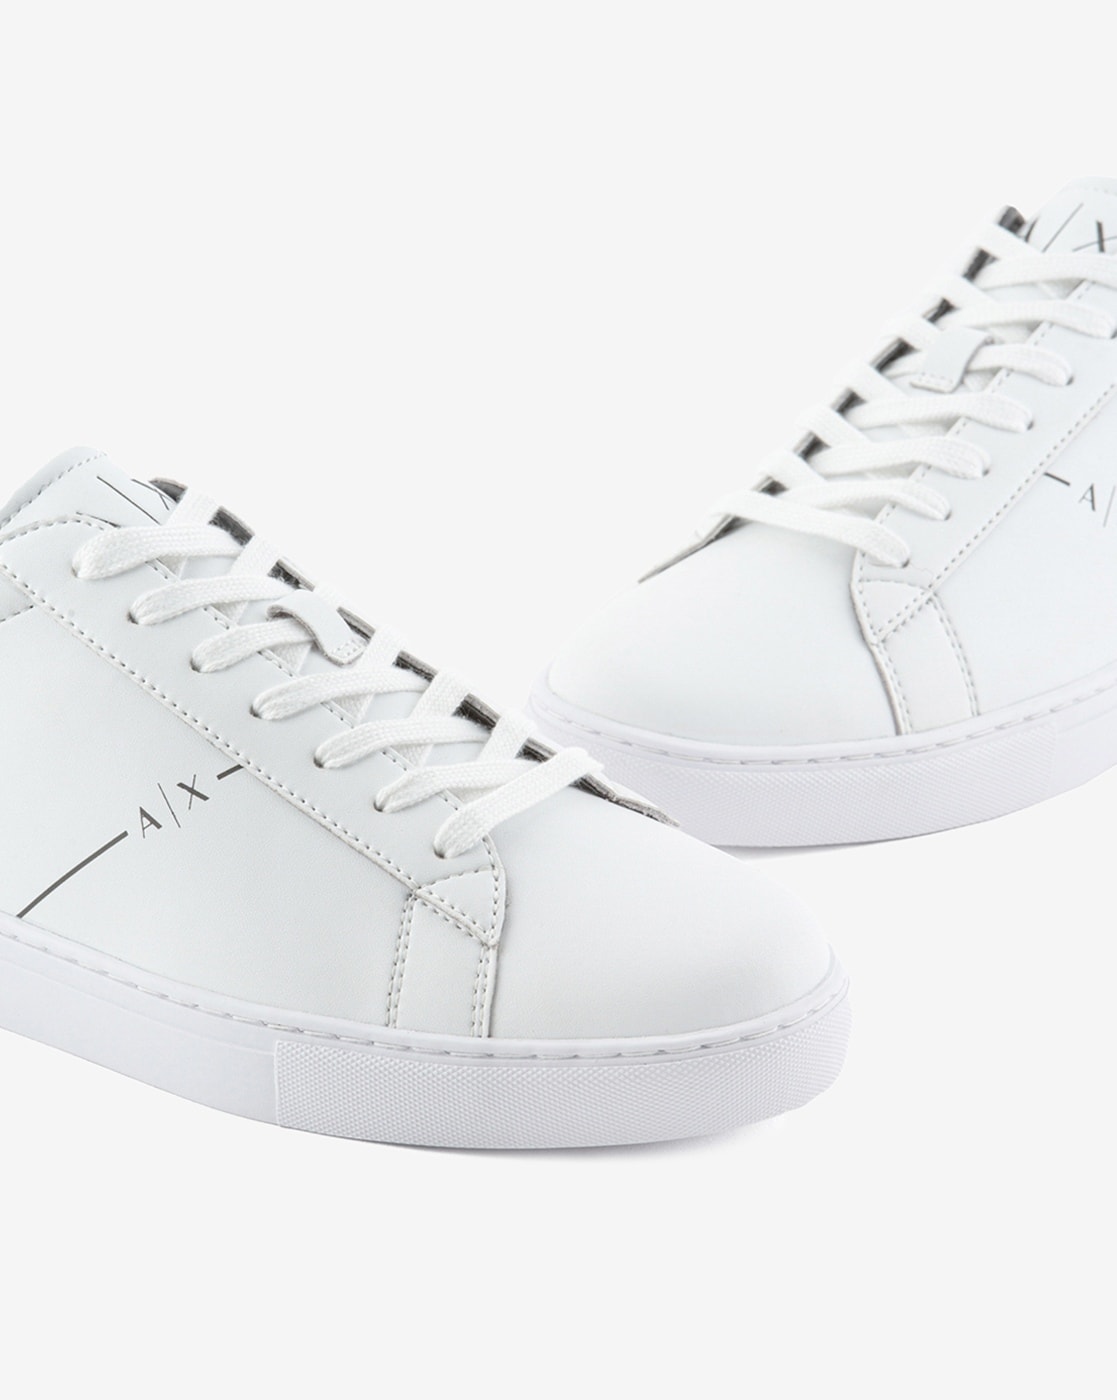 Armani Exchange Graffiti Logo Leather Sneakers in White for Men | Lyst